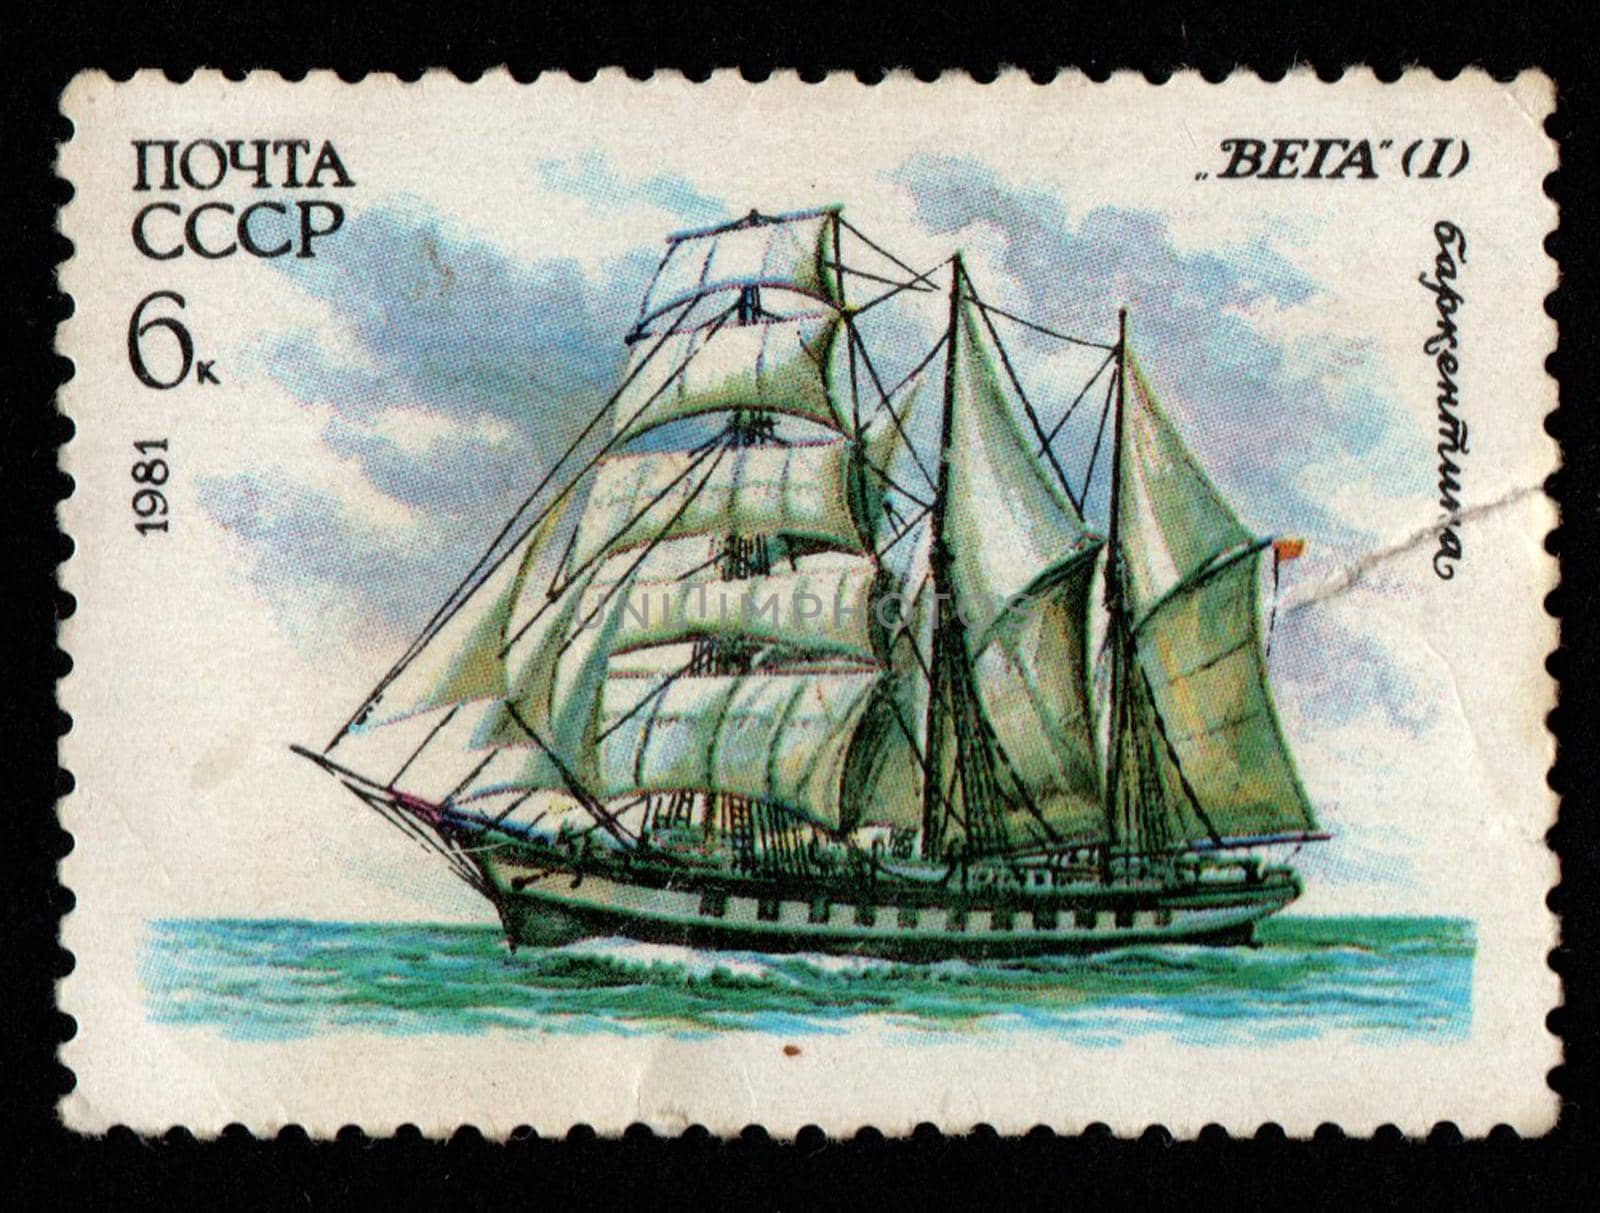 USSR - CIRCA 1981: sailing ship barquentine on a USSR postage stamp. Soviet sailboat on a postage stamp. Sea transport on postage stamp. Old Soviet postage dedicated to Soviet ships. Philately